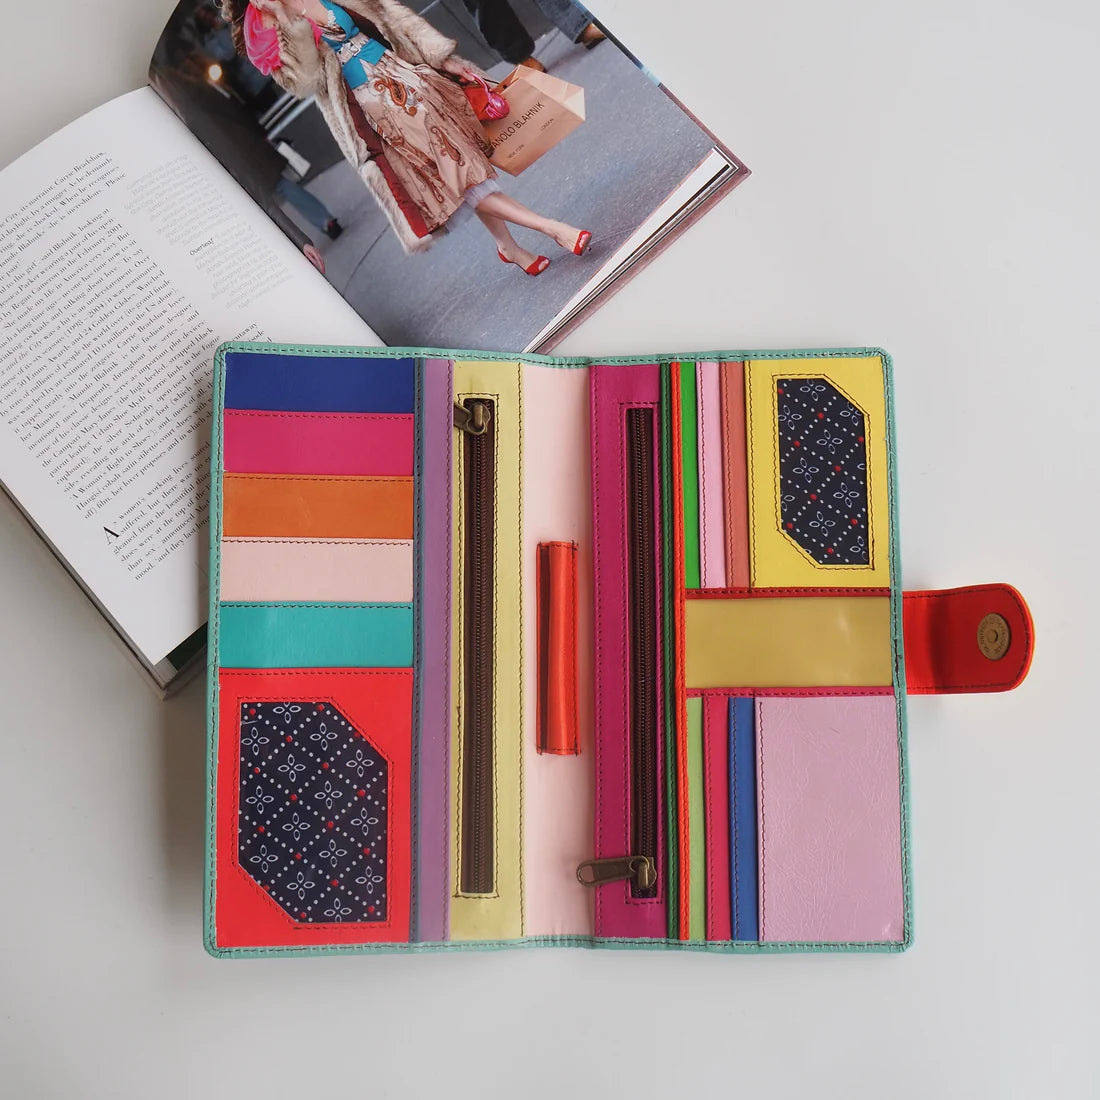 Eve organiser teal with pink spot